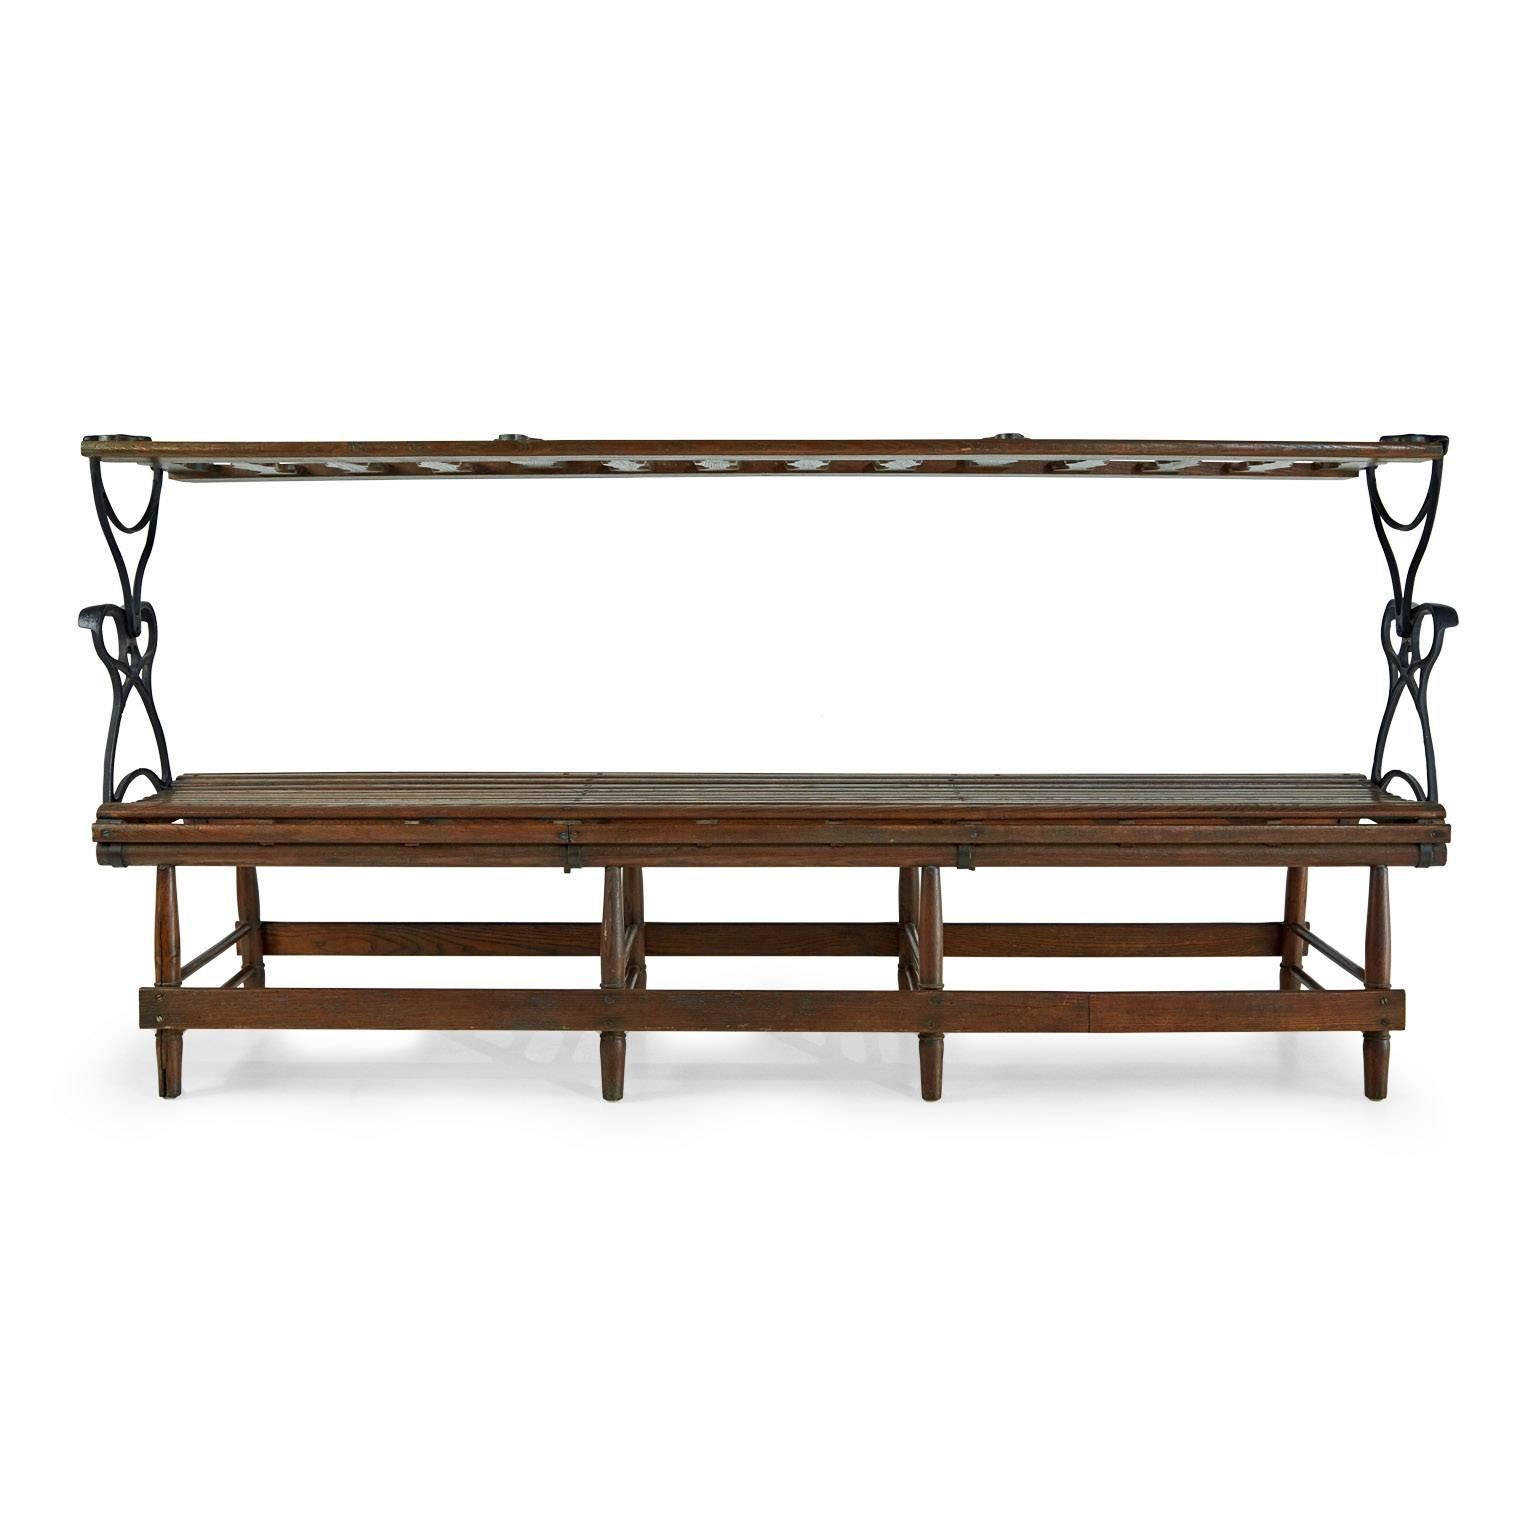 Add some industrial style to your interior or exterior design concept with this Victorian iron and wood reversible railroad bench. This Machine Age piece features a rotating mechanism that allows the spindled back of this bench to be switched from